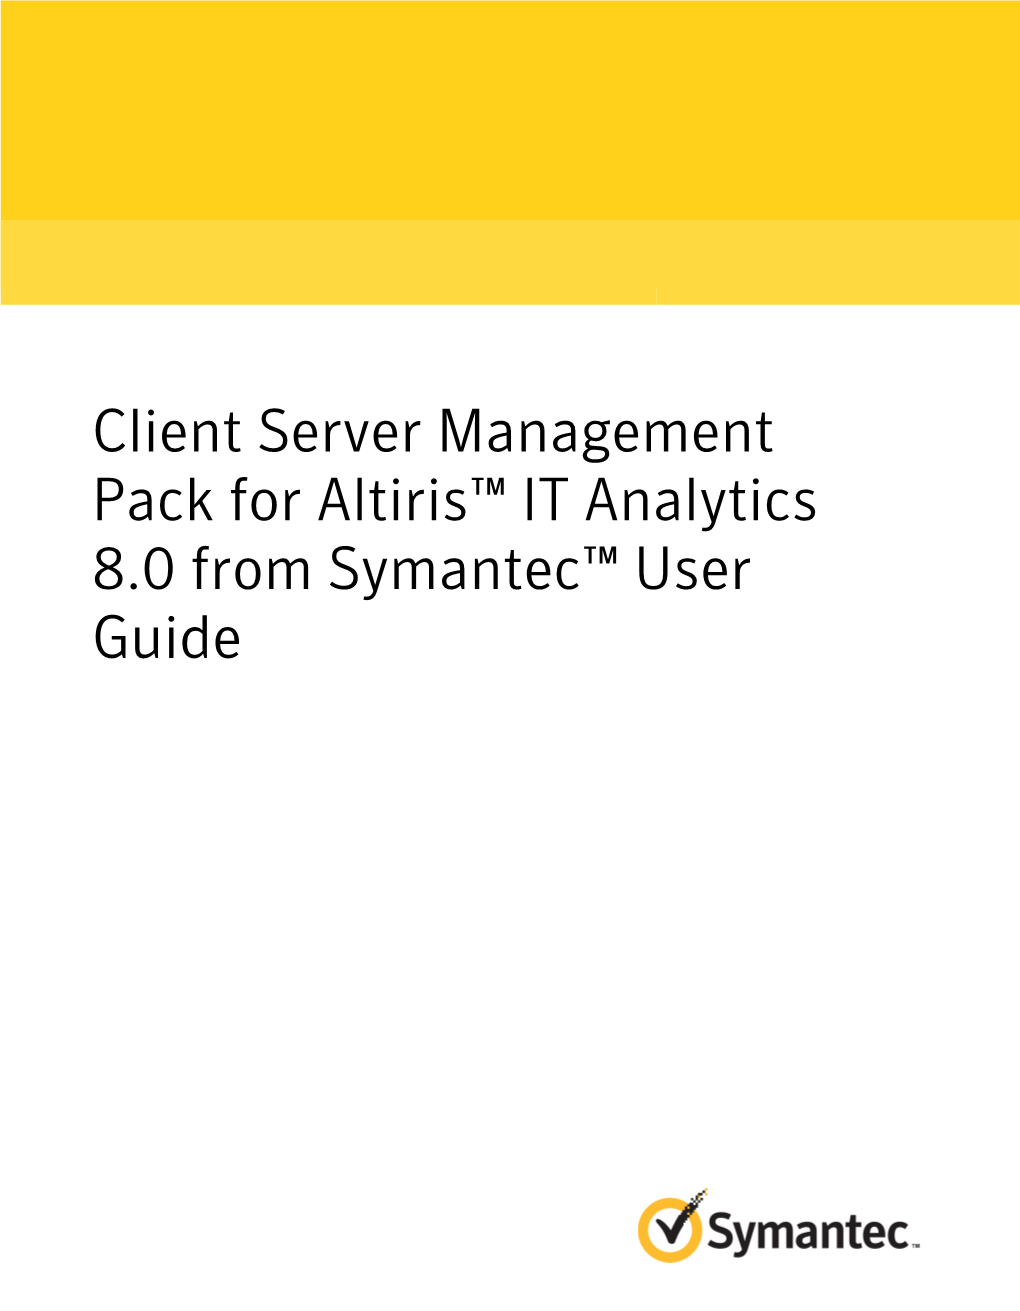 Client Server Management Pack for Altiris™ IT Analytics 8.0 From